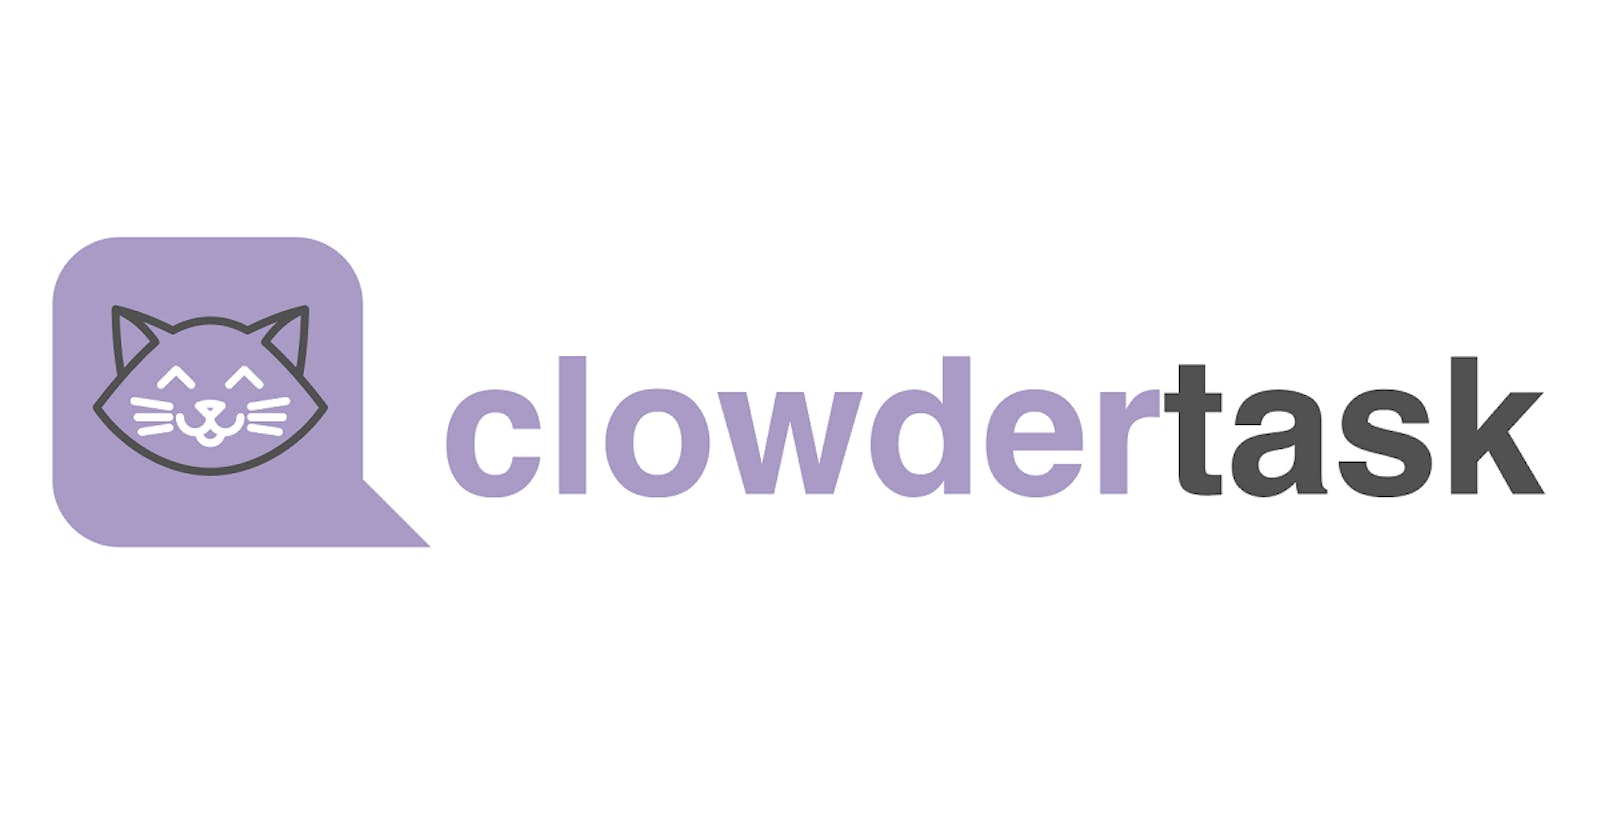 What I learned in the first month of developing ClowderTask